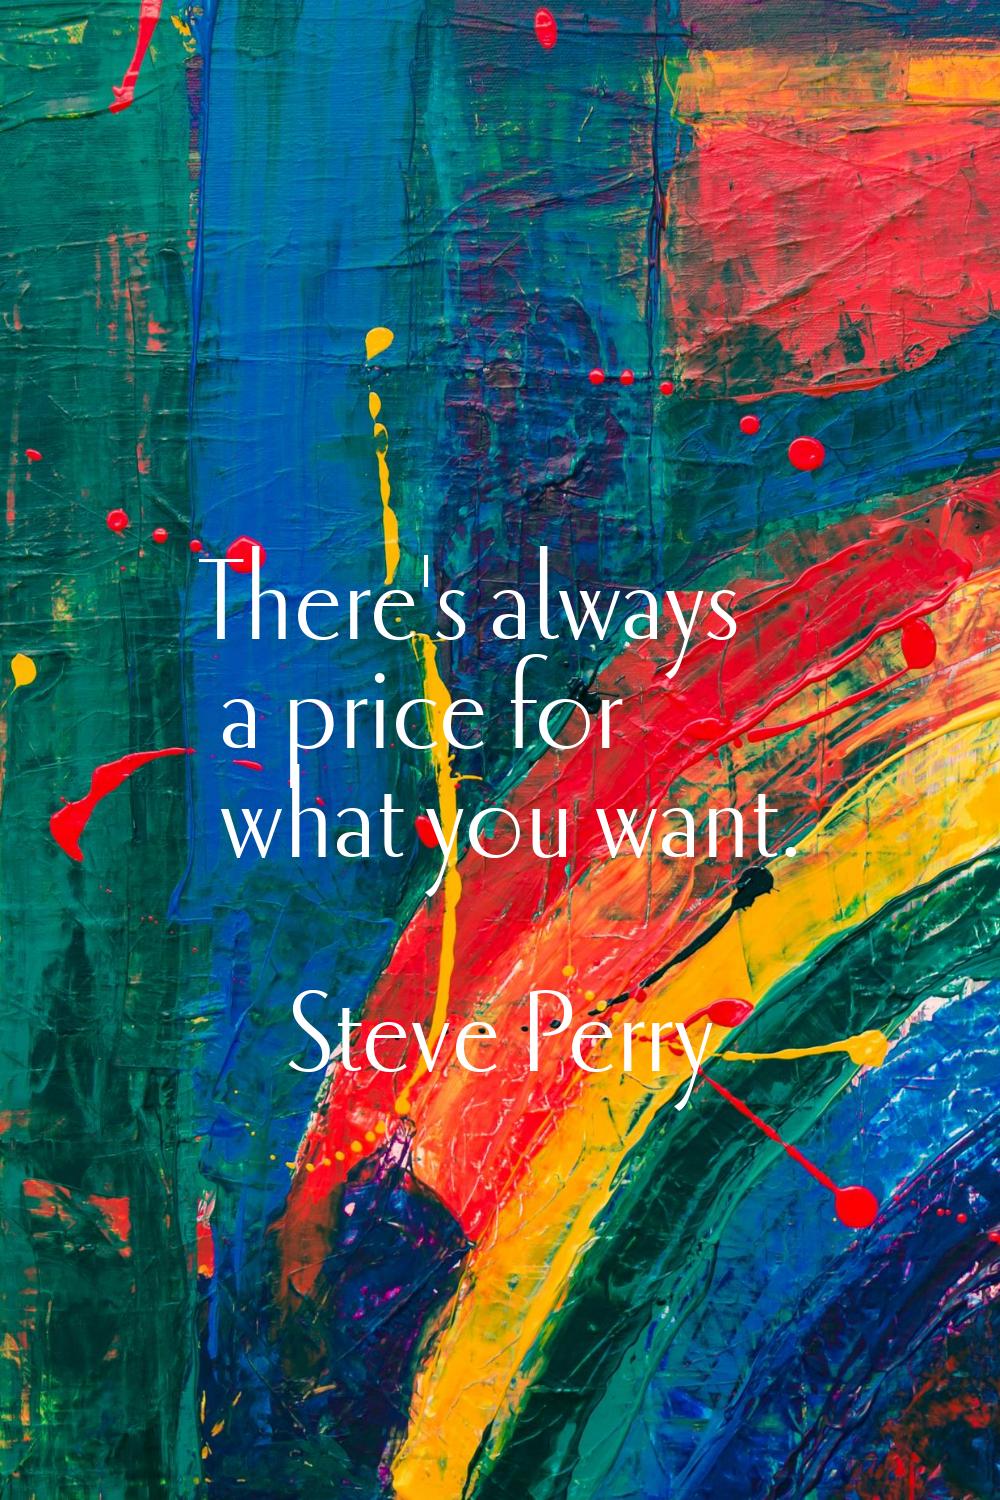 There's always a price for what you want.